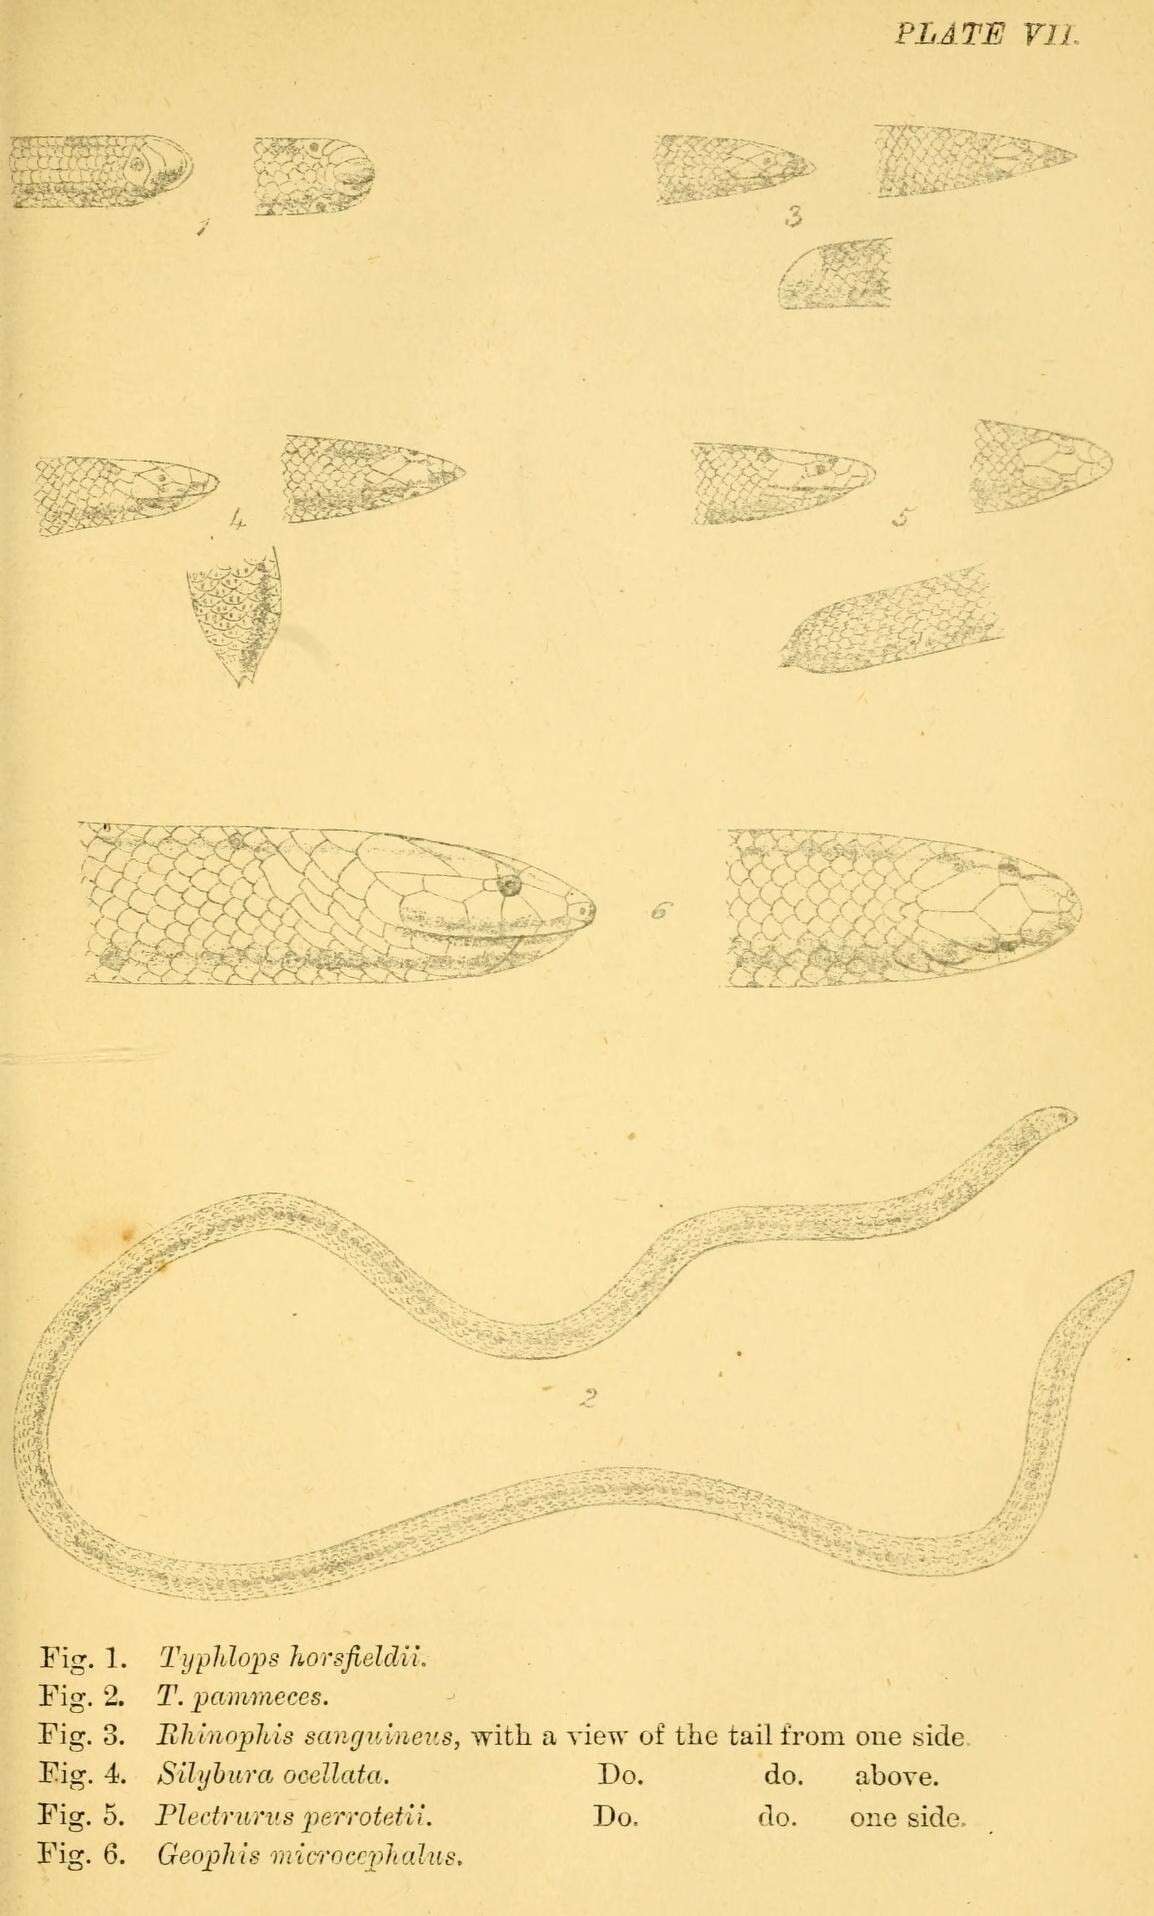 Image of South India Worm Snake